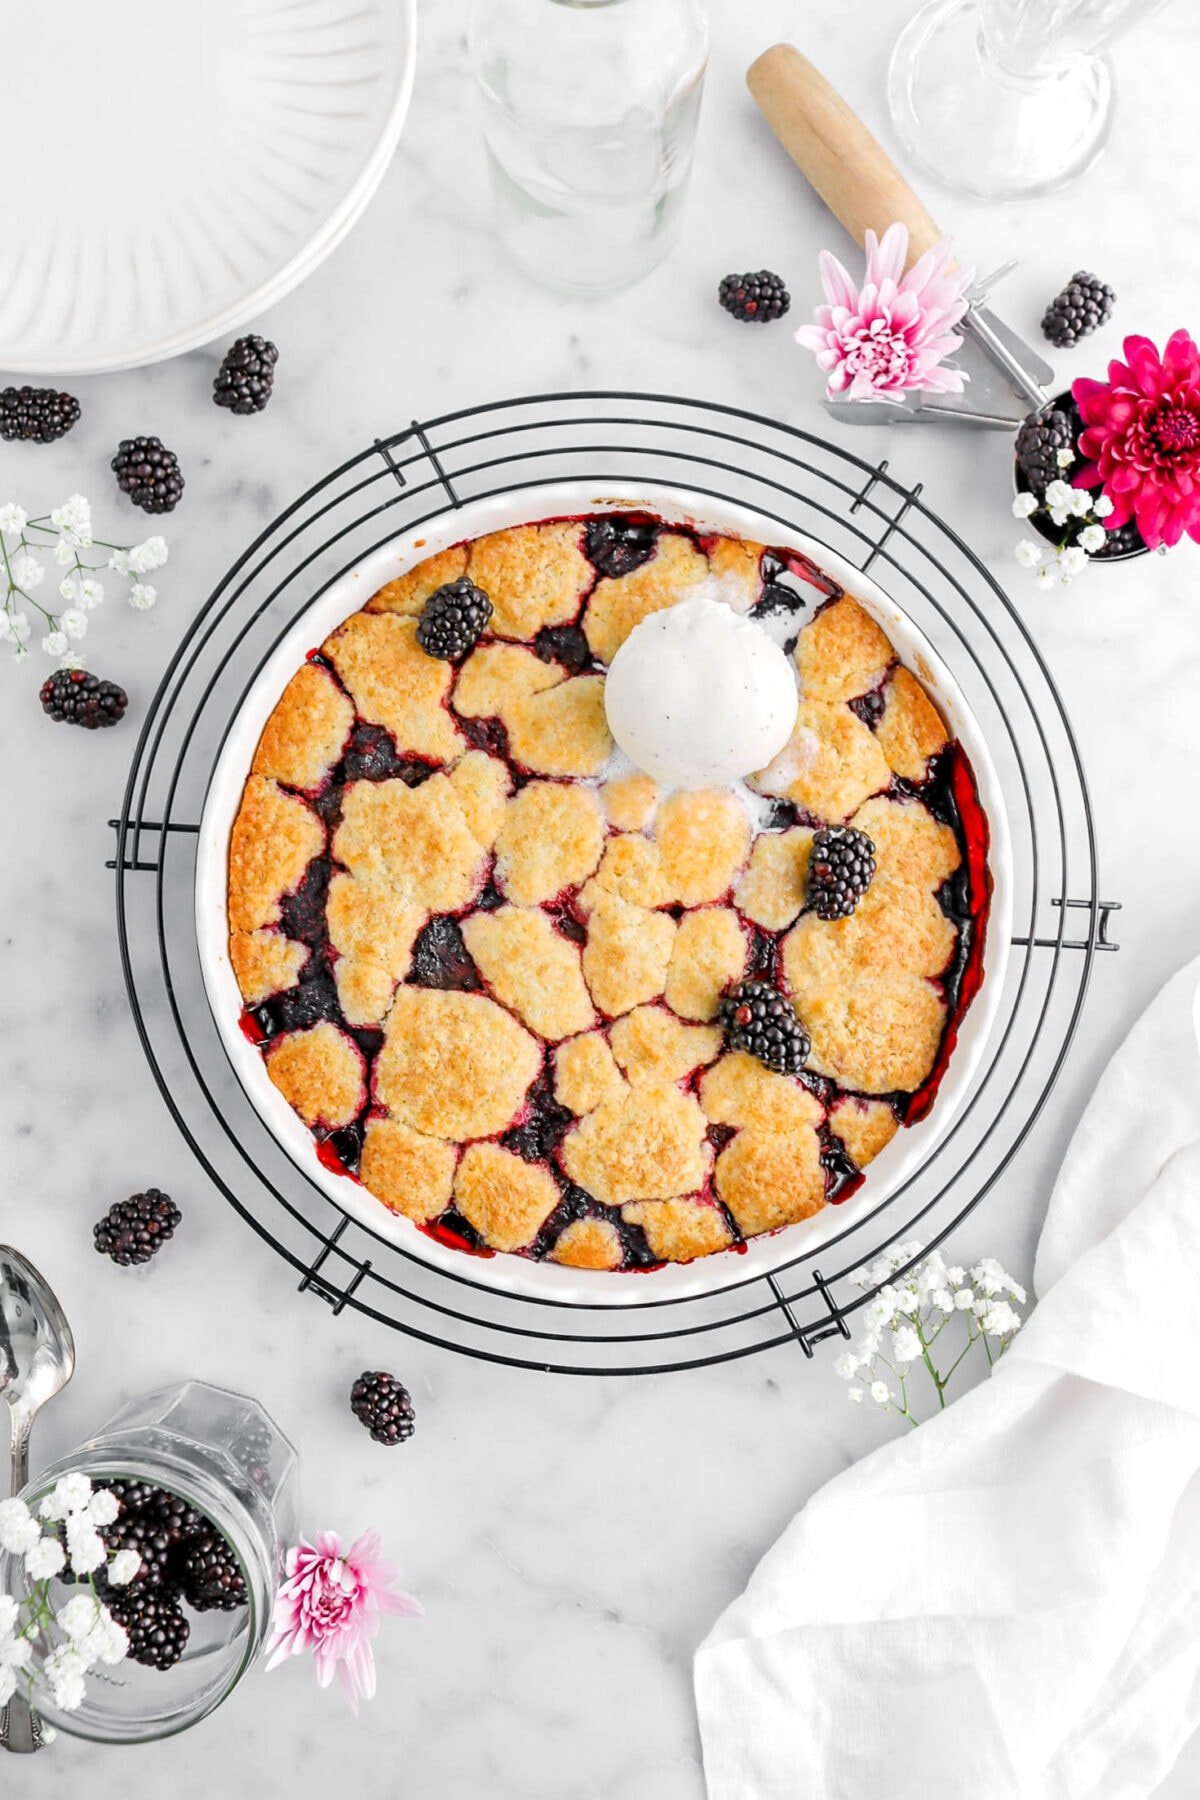 blackberry cobbler in round white pan on a round black wire cooling rack with a scoop of ice cream and three fresh blackberries on top of cobbler, with more berries and flowers surrounding dish on marble surface with white napkin and white plate beside.